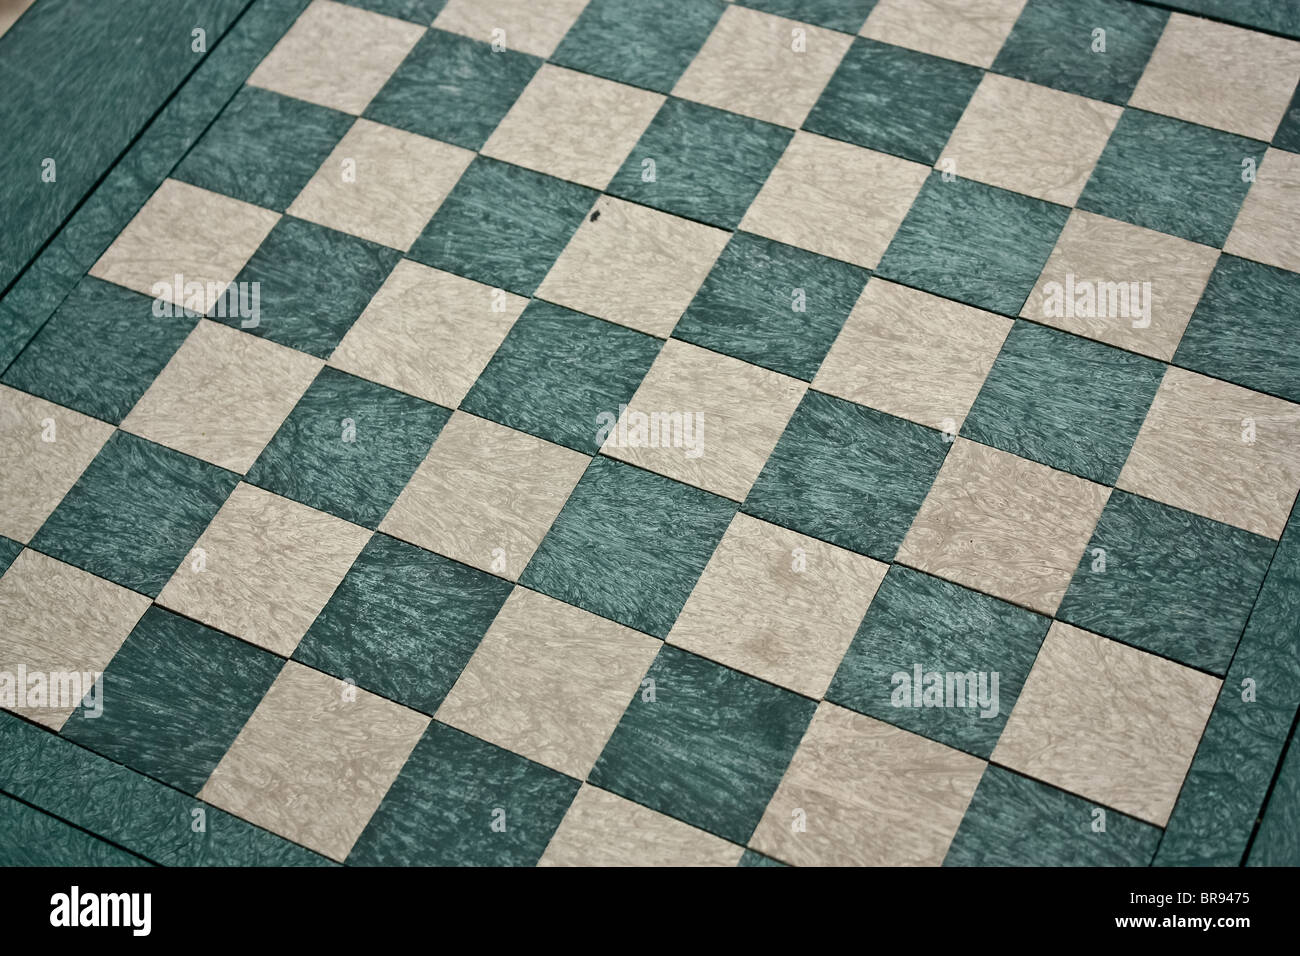 chess board table outdoor Stock Photo